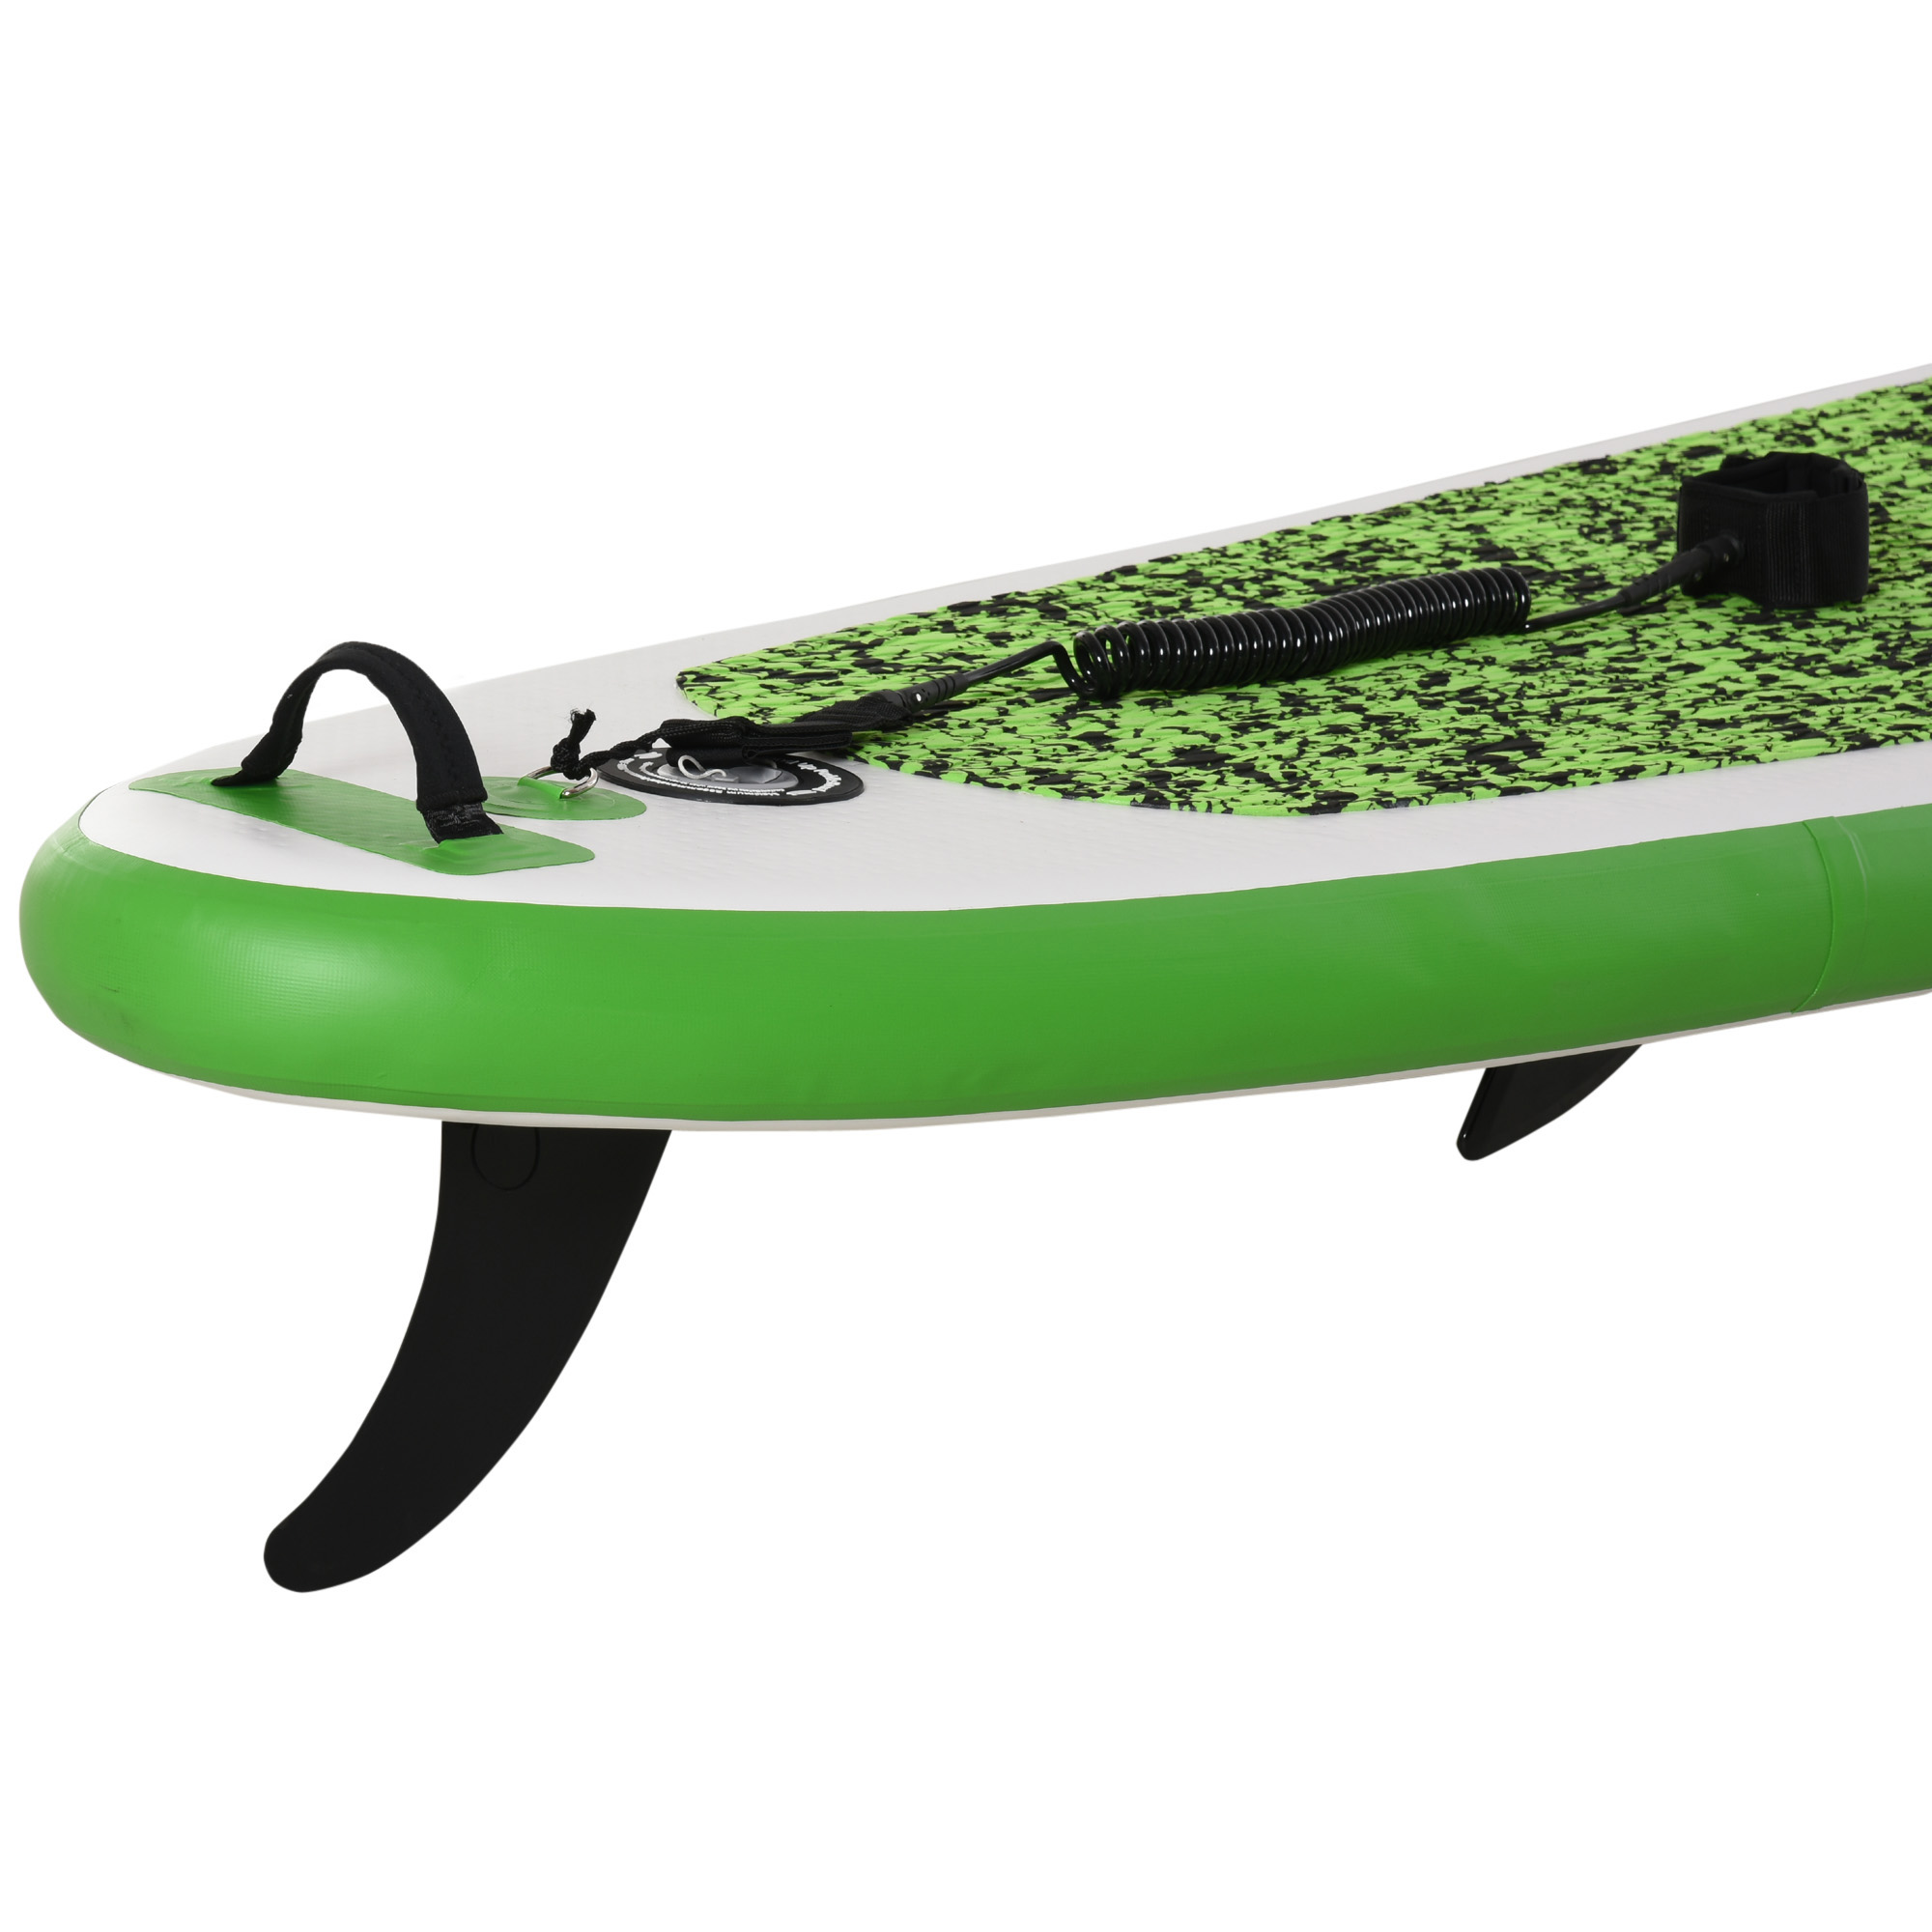 HOMCOM Inflatable Adult Paddle Board Thick Plastic Multi-Layer Shell  Non-Slip Panel Green and White